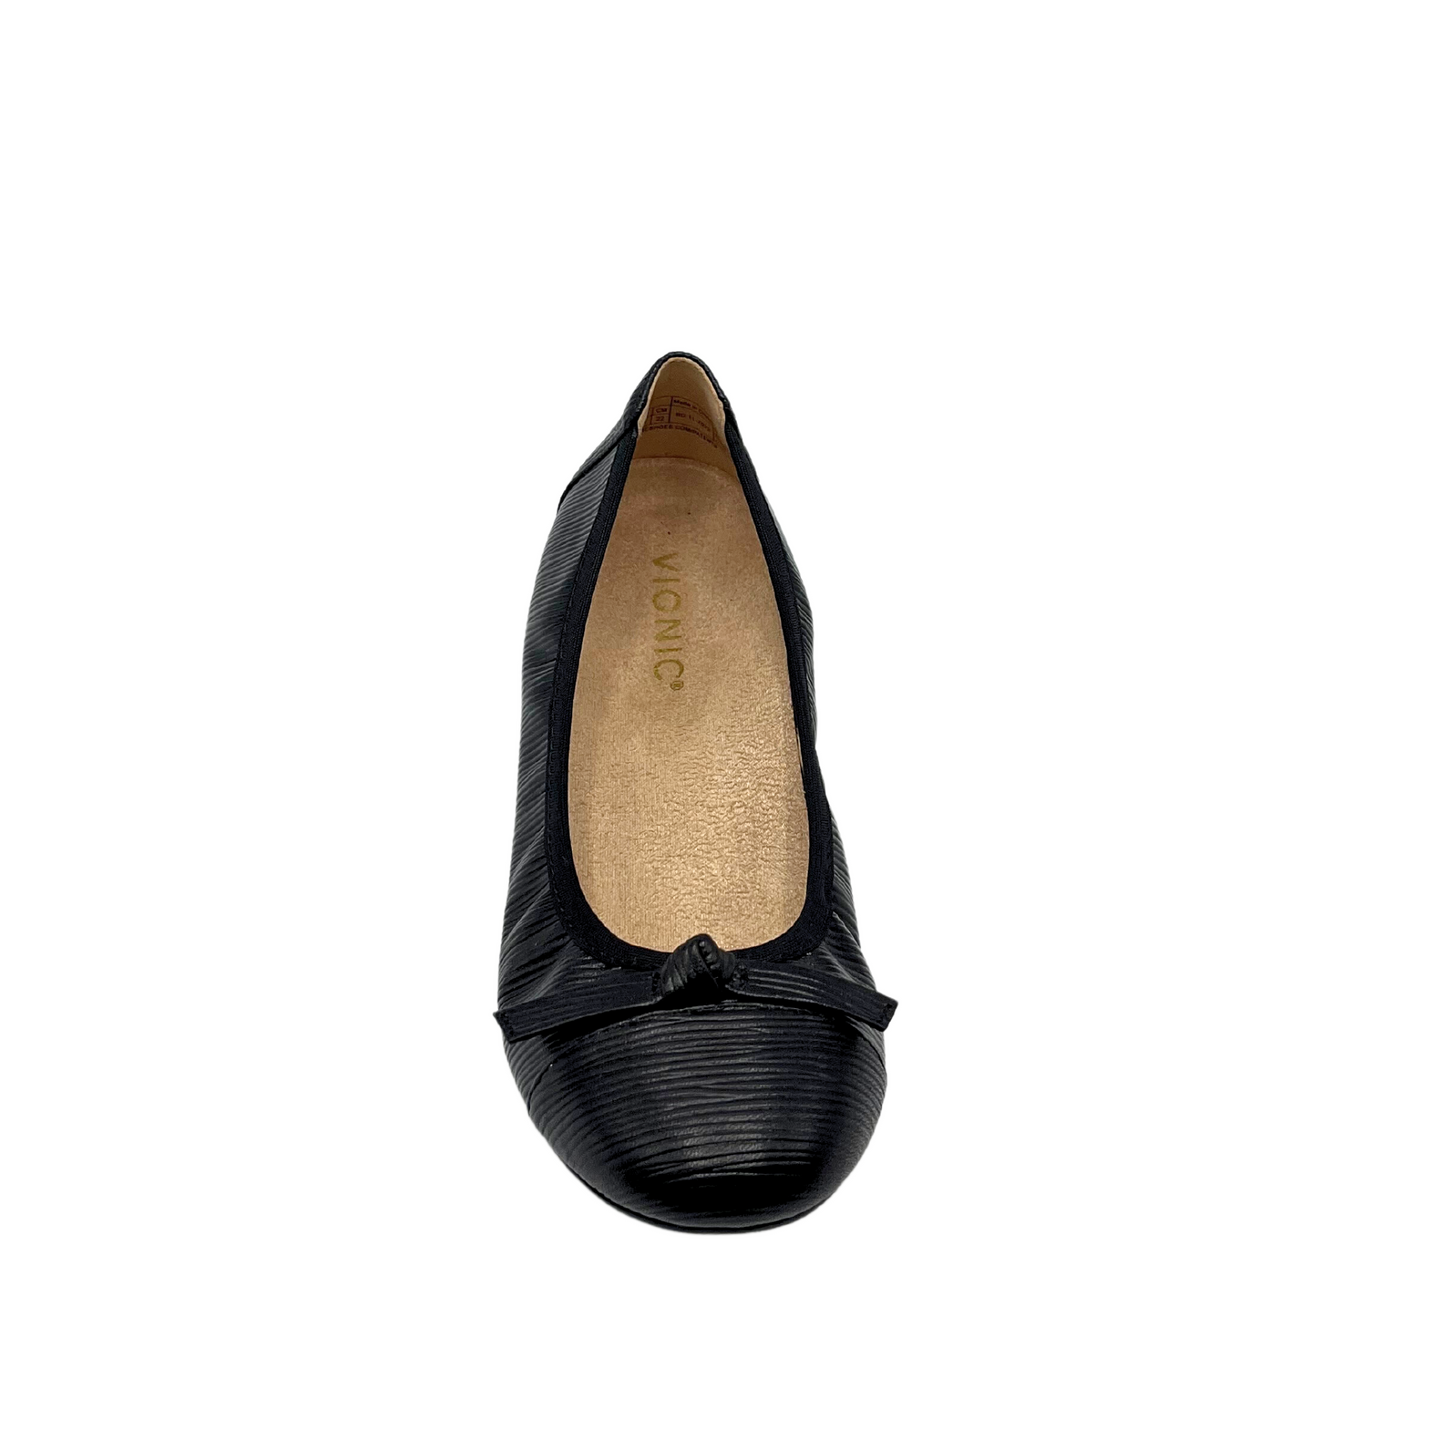 Top down view of a black leather ballet flat.  Leather is textured, features a toe cap and small leather ribbon detail on front.